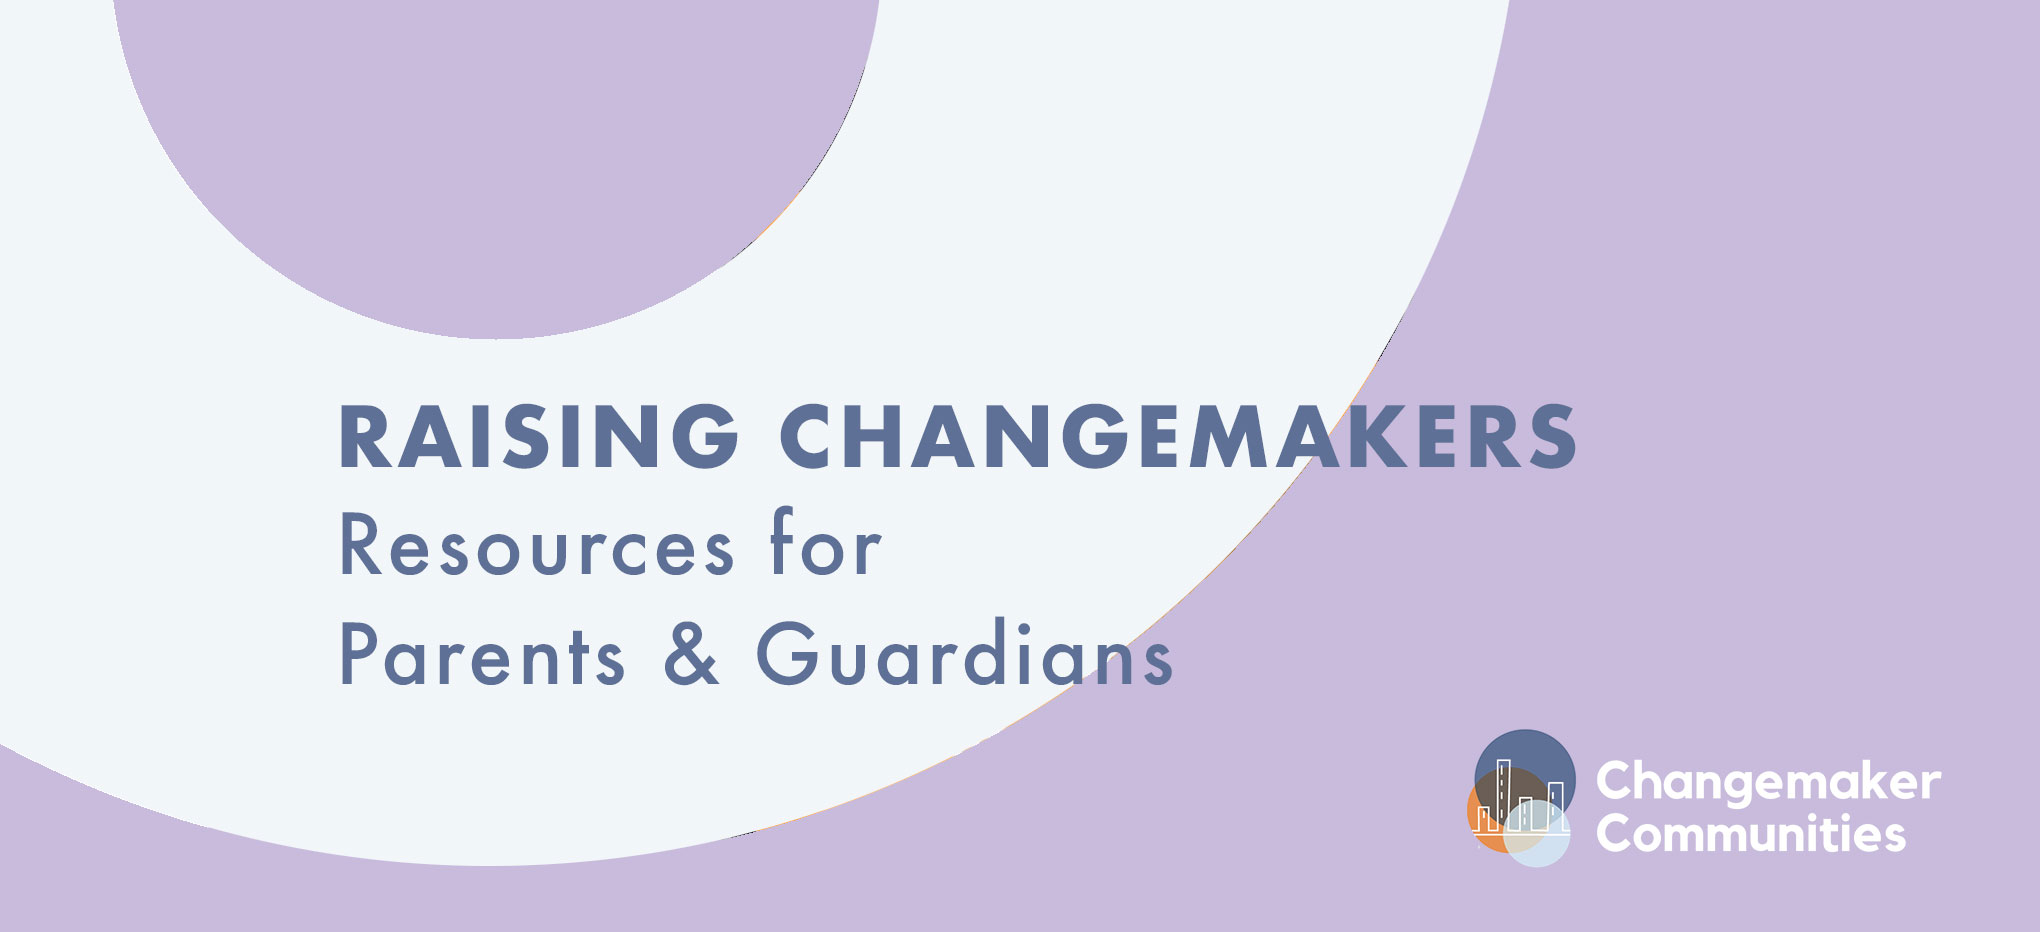 A simple web banner with concentric circles, alternating in white and lilac. In the lower right corner is a logo for Changemaker communities. The text on the banner reads Raising Changemakers Resources for Parents and Guardians.